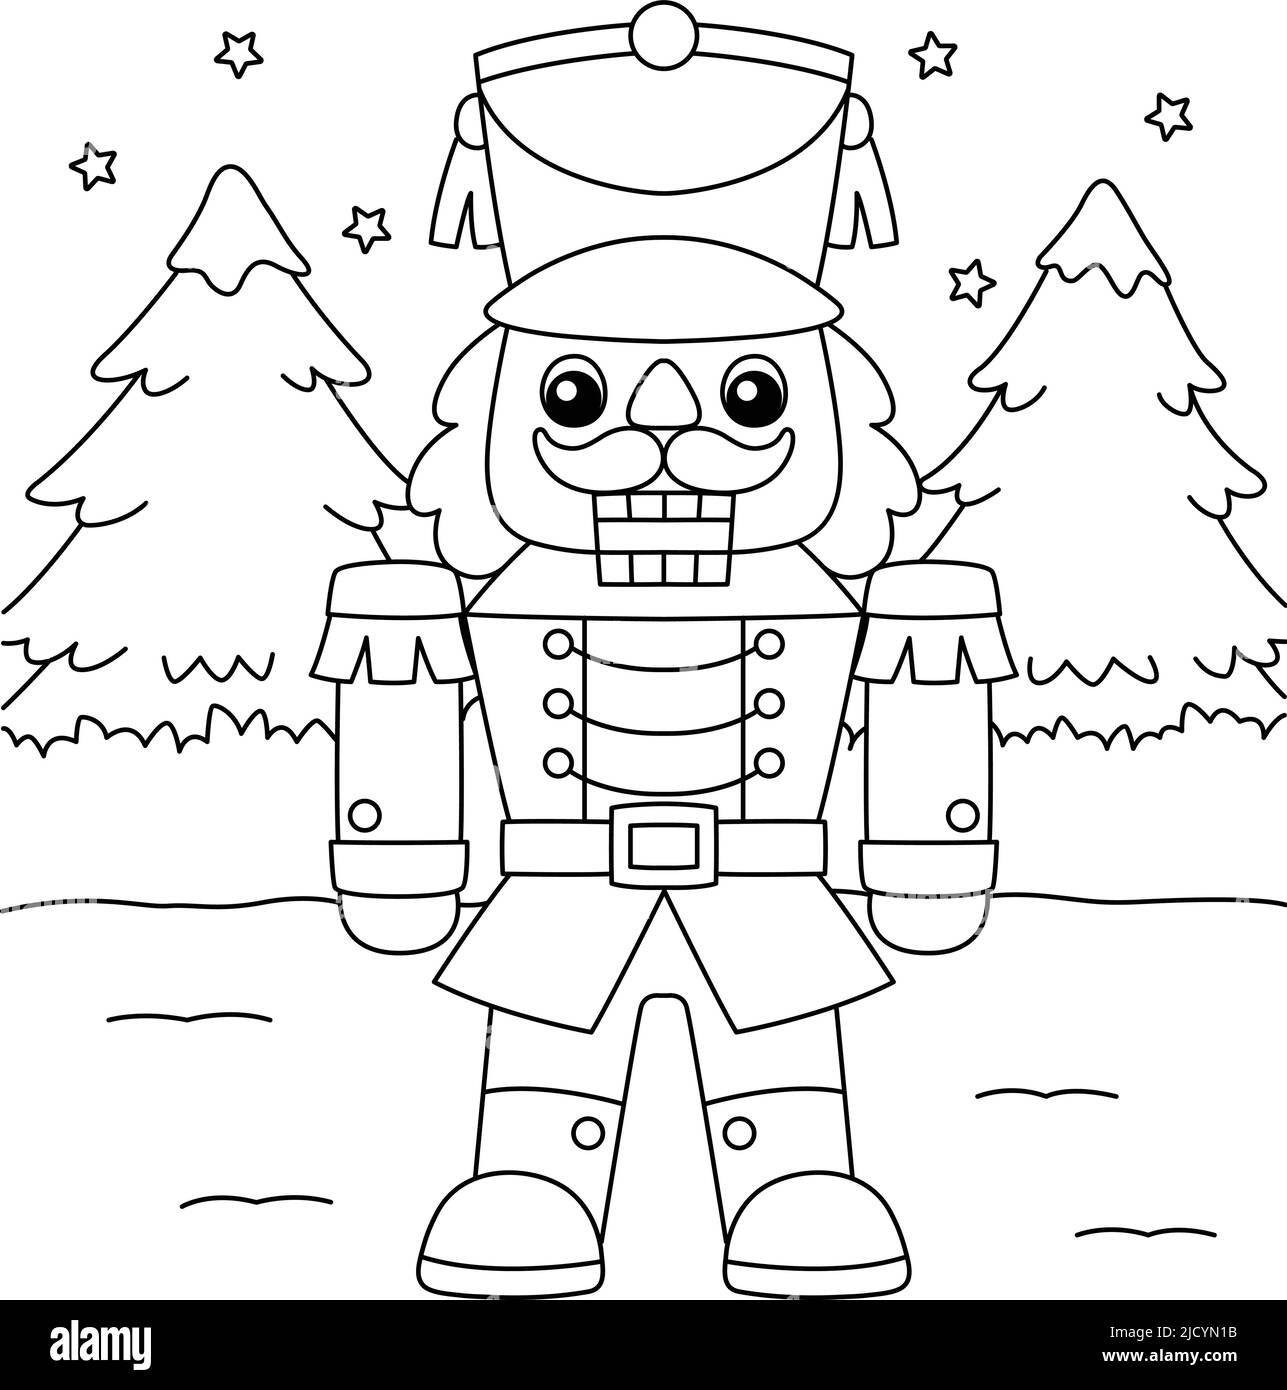 Christmas nutcracker coloring page for kids stock vector image art